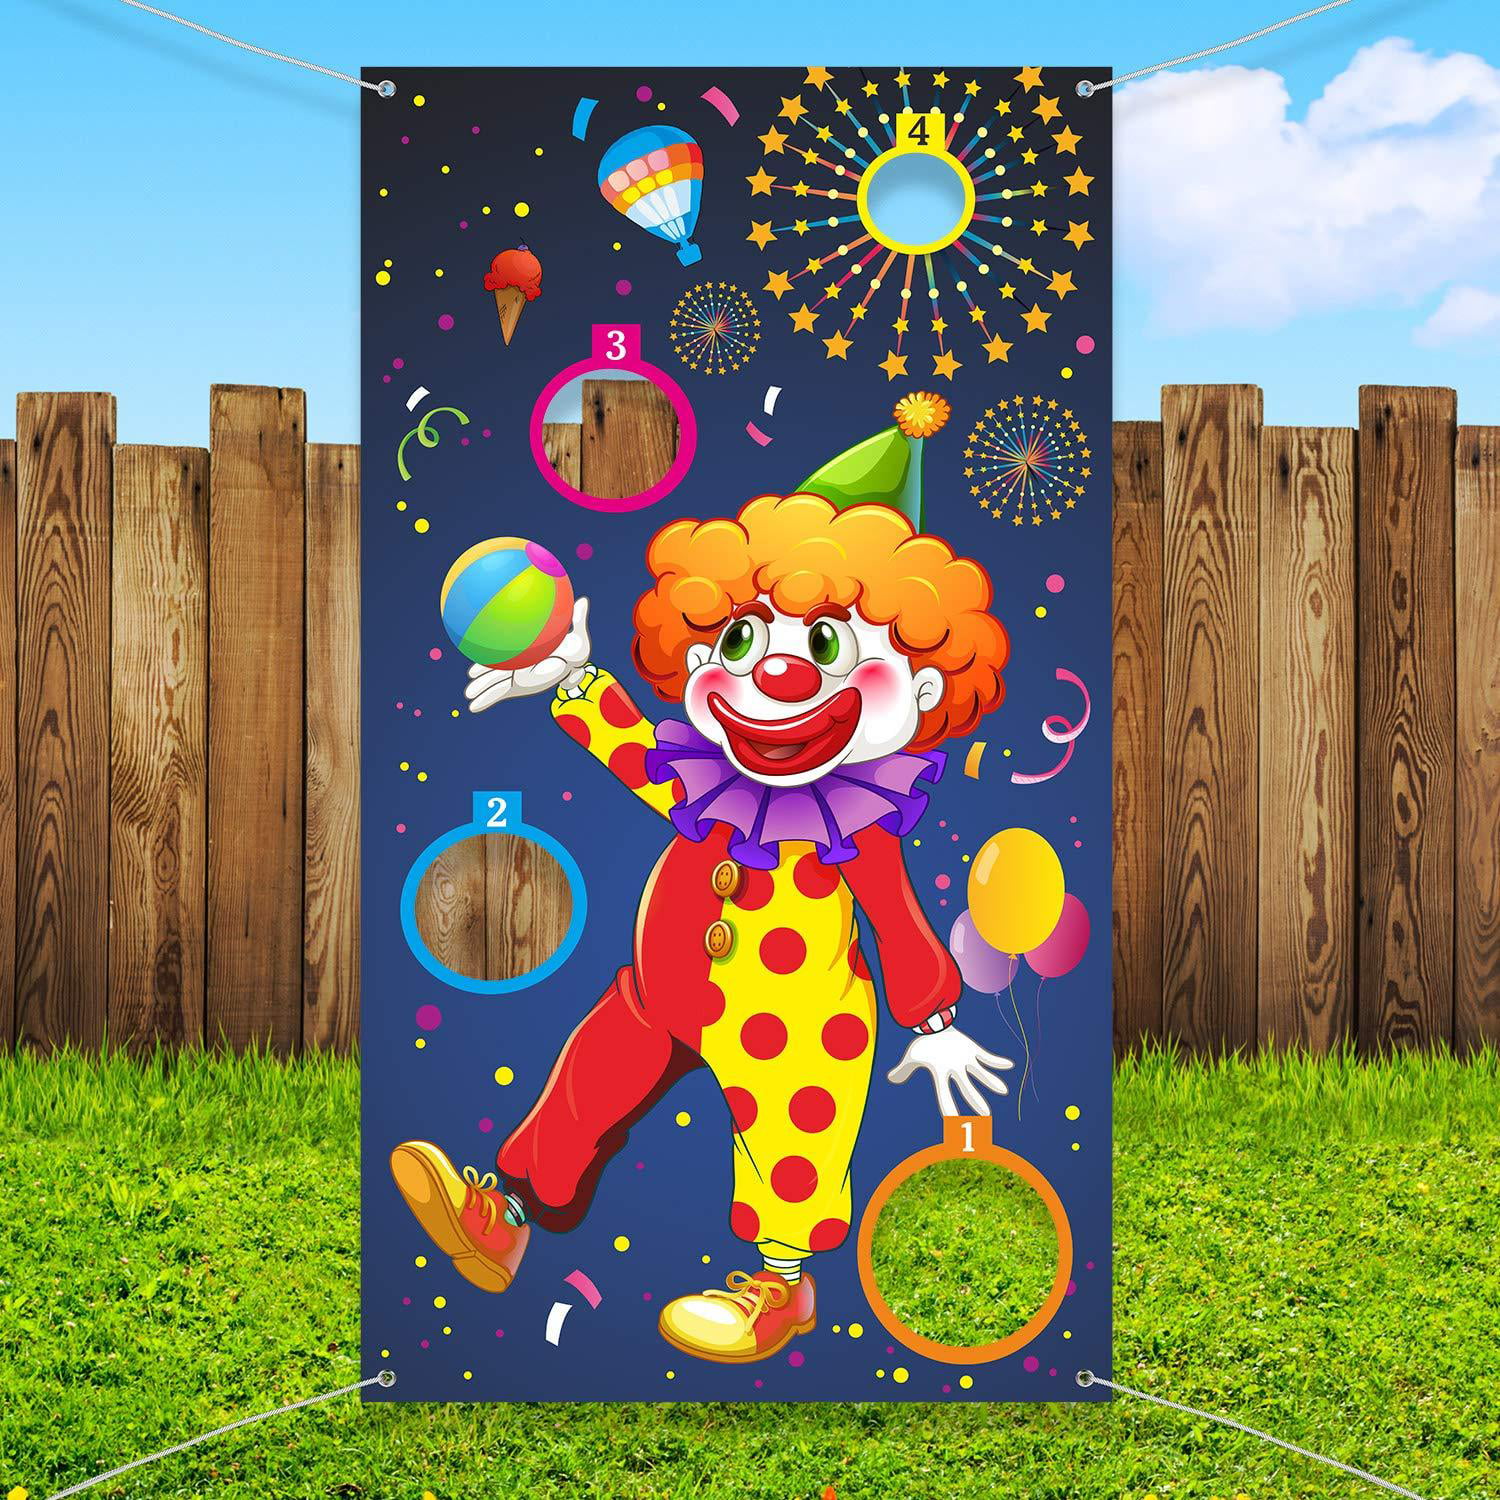 Details about   Outus Carnival Toss Games Clown Banner with 3 Bean Bags Circus Bean Bag Toss ...